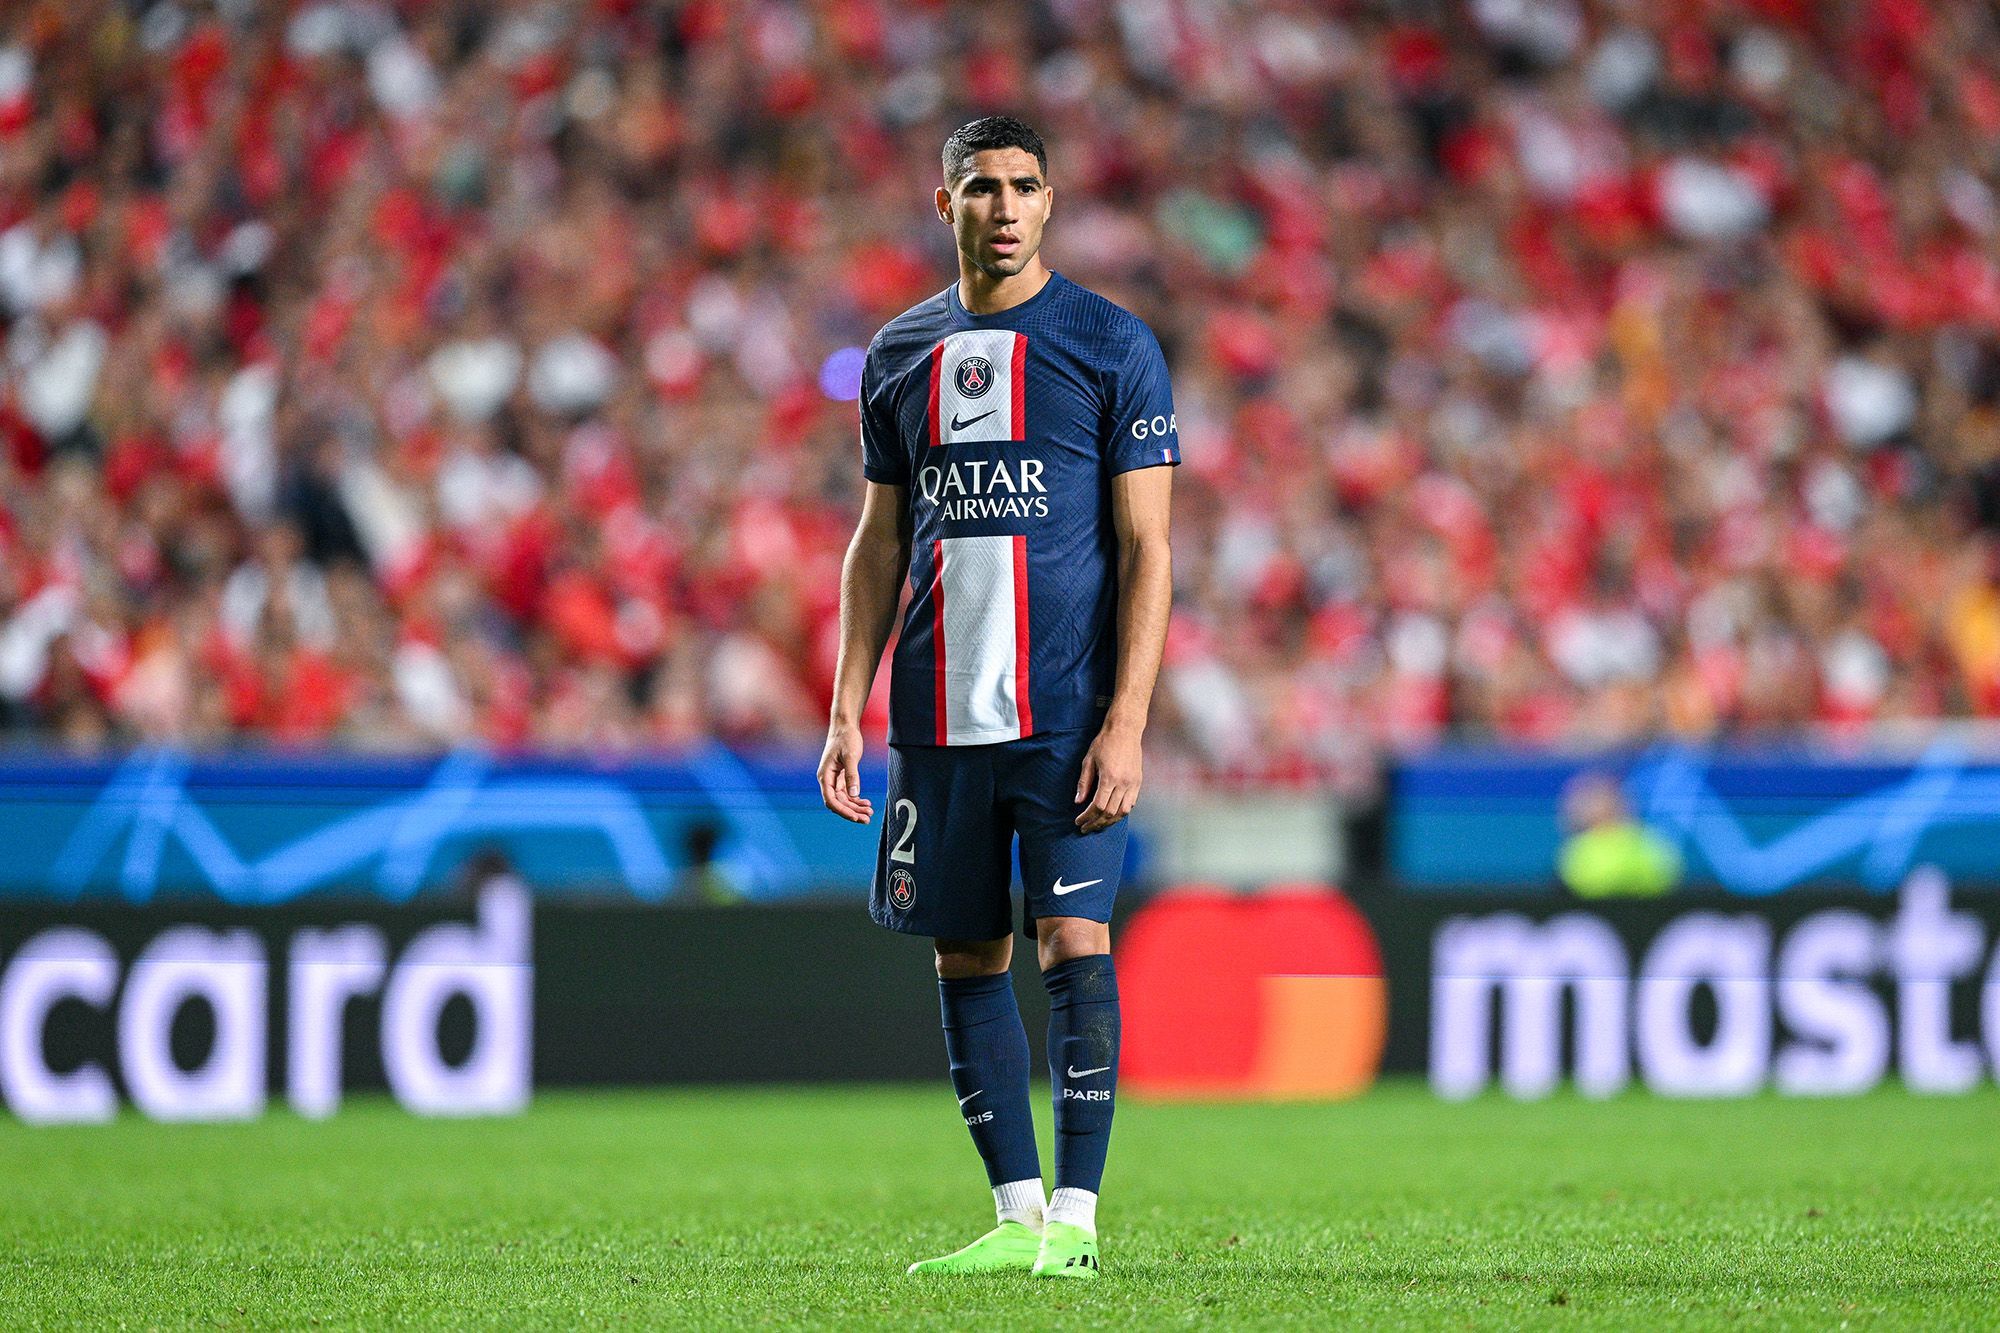 PSG supports defender Hakimi, who denies rape allegations